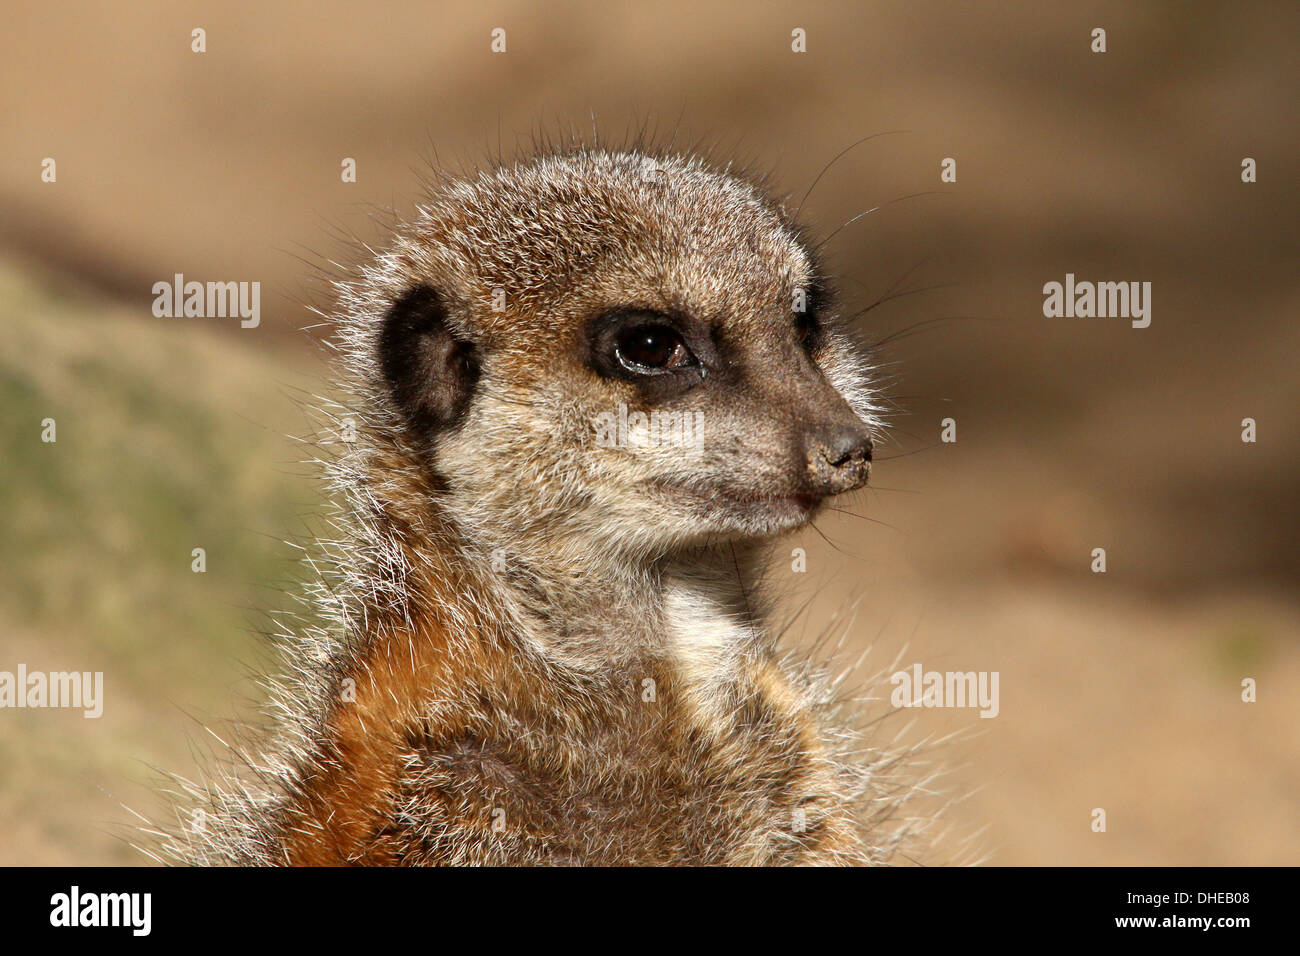 Close-ups of a group of African Meerkats (Suricata suricatta) in a zoo setting Stock Photo